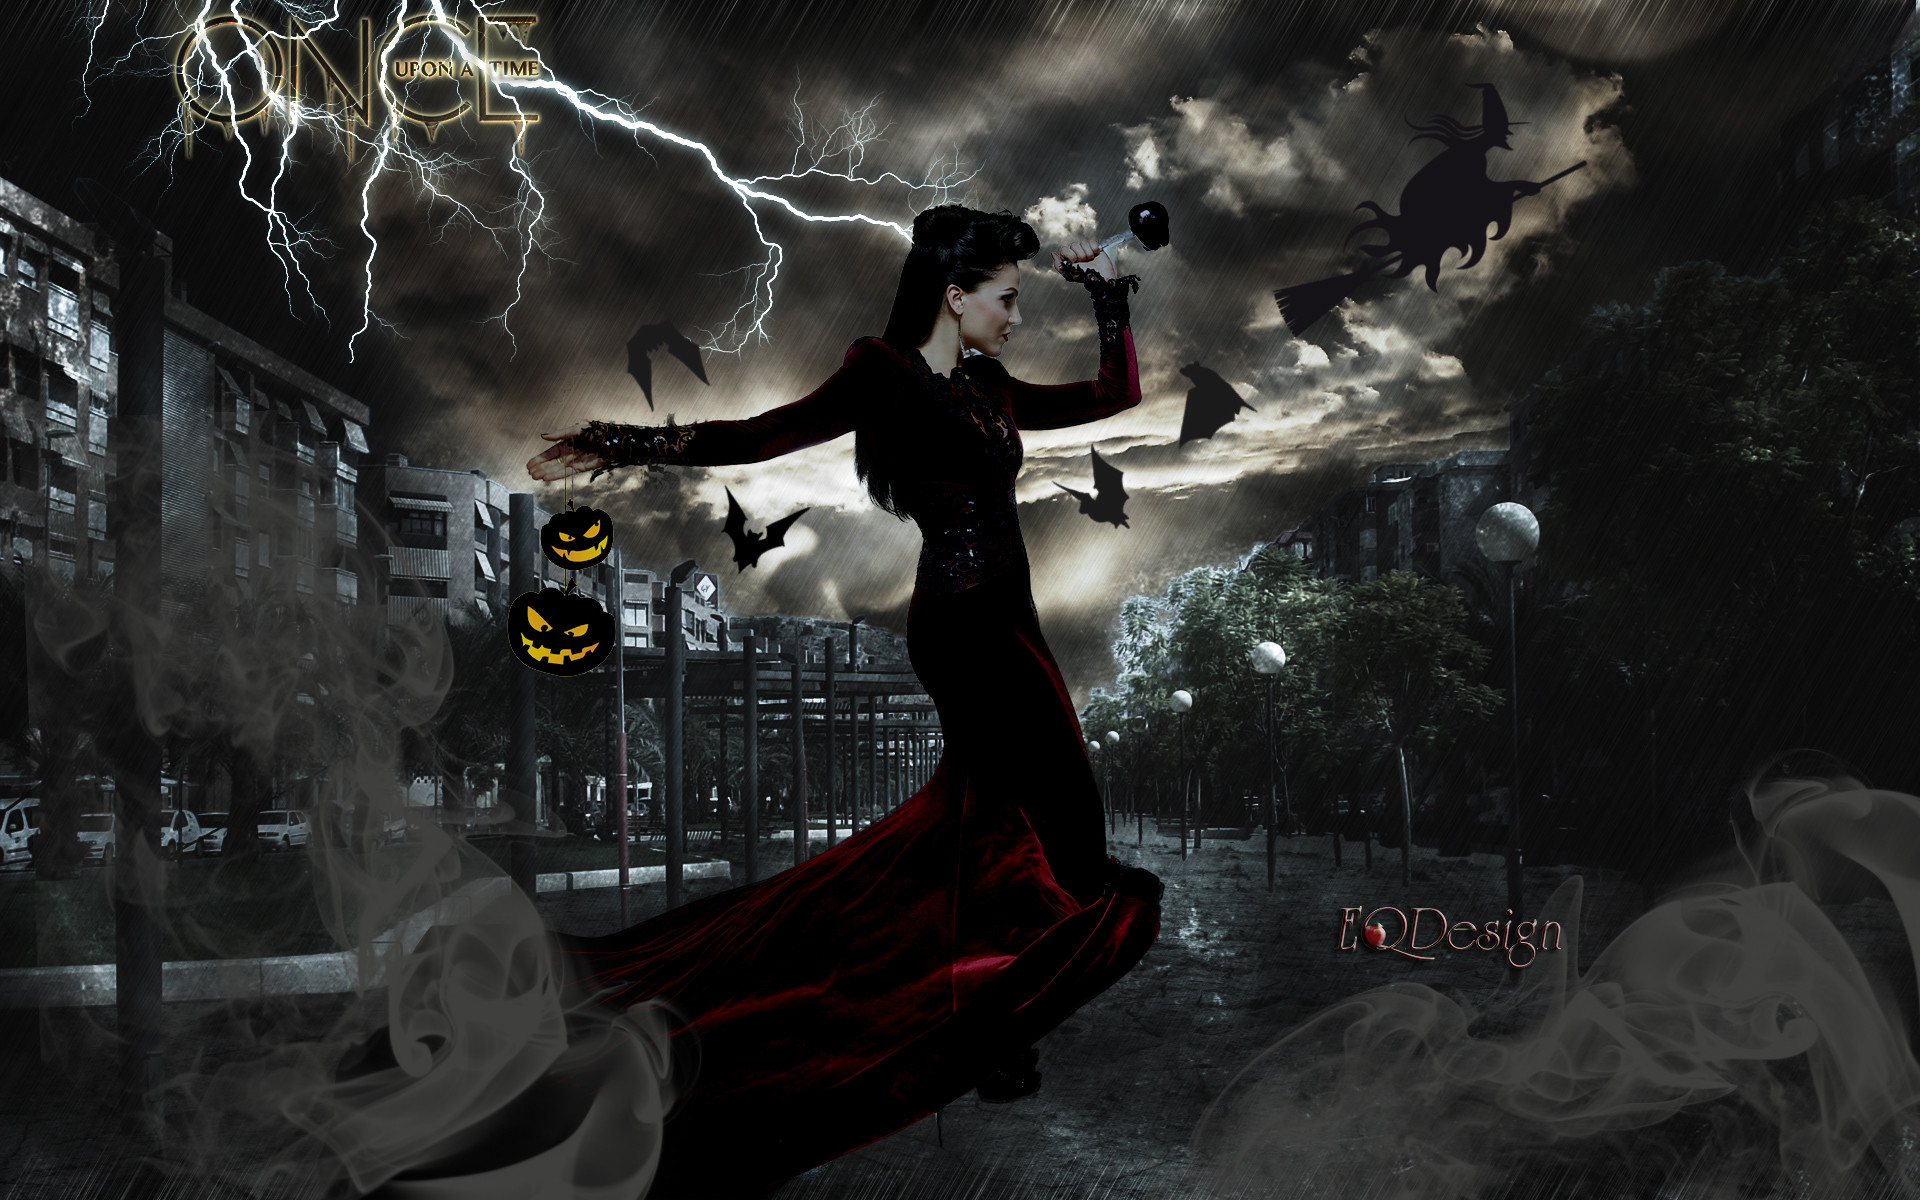 1920x1200 The Evil Queen - Halloween by eqdesign on DeviantArt. The Evil Queen  Halloween By Eqdesign On DeviantArt